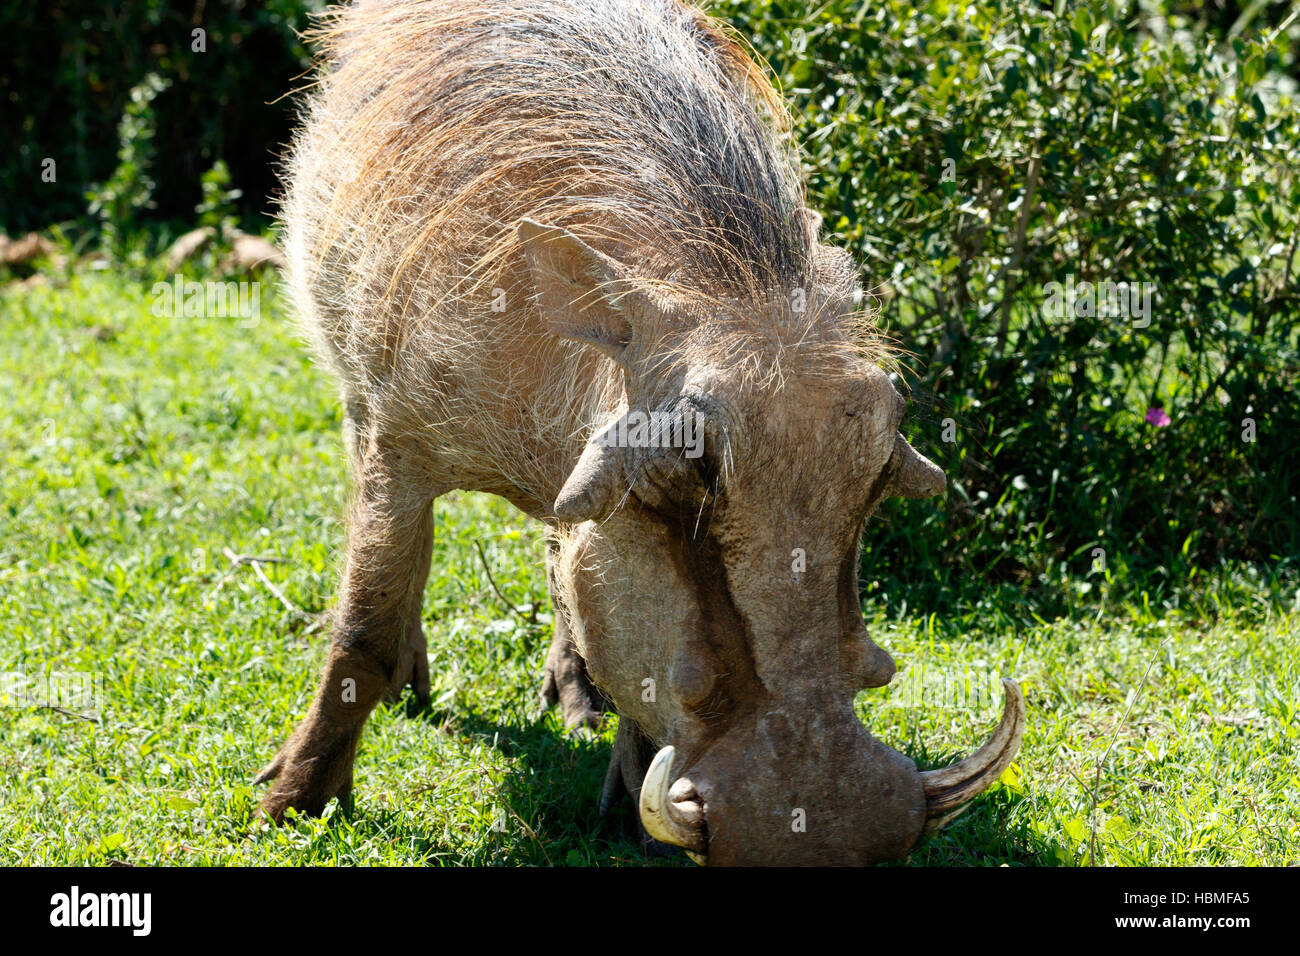 Close up view of a warthog - Pumba Stock Photo